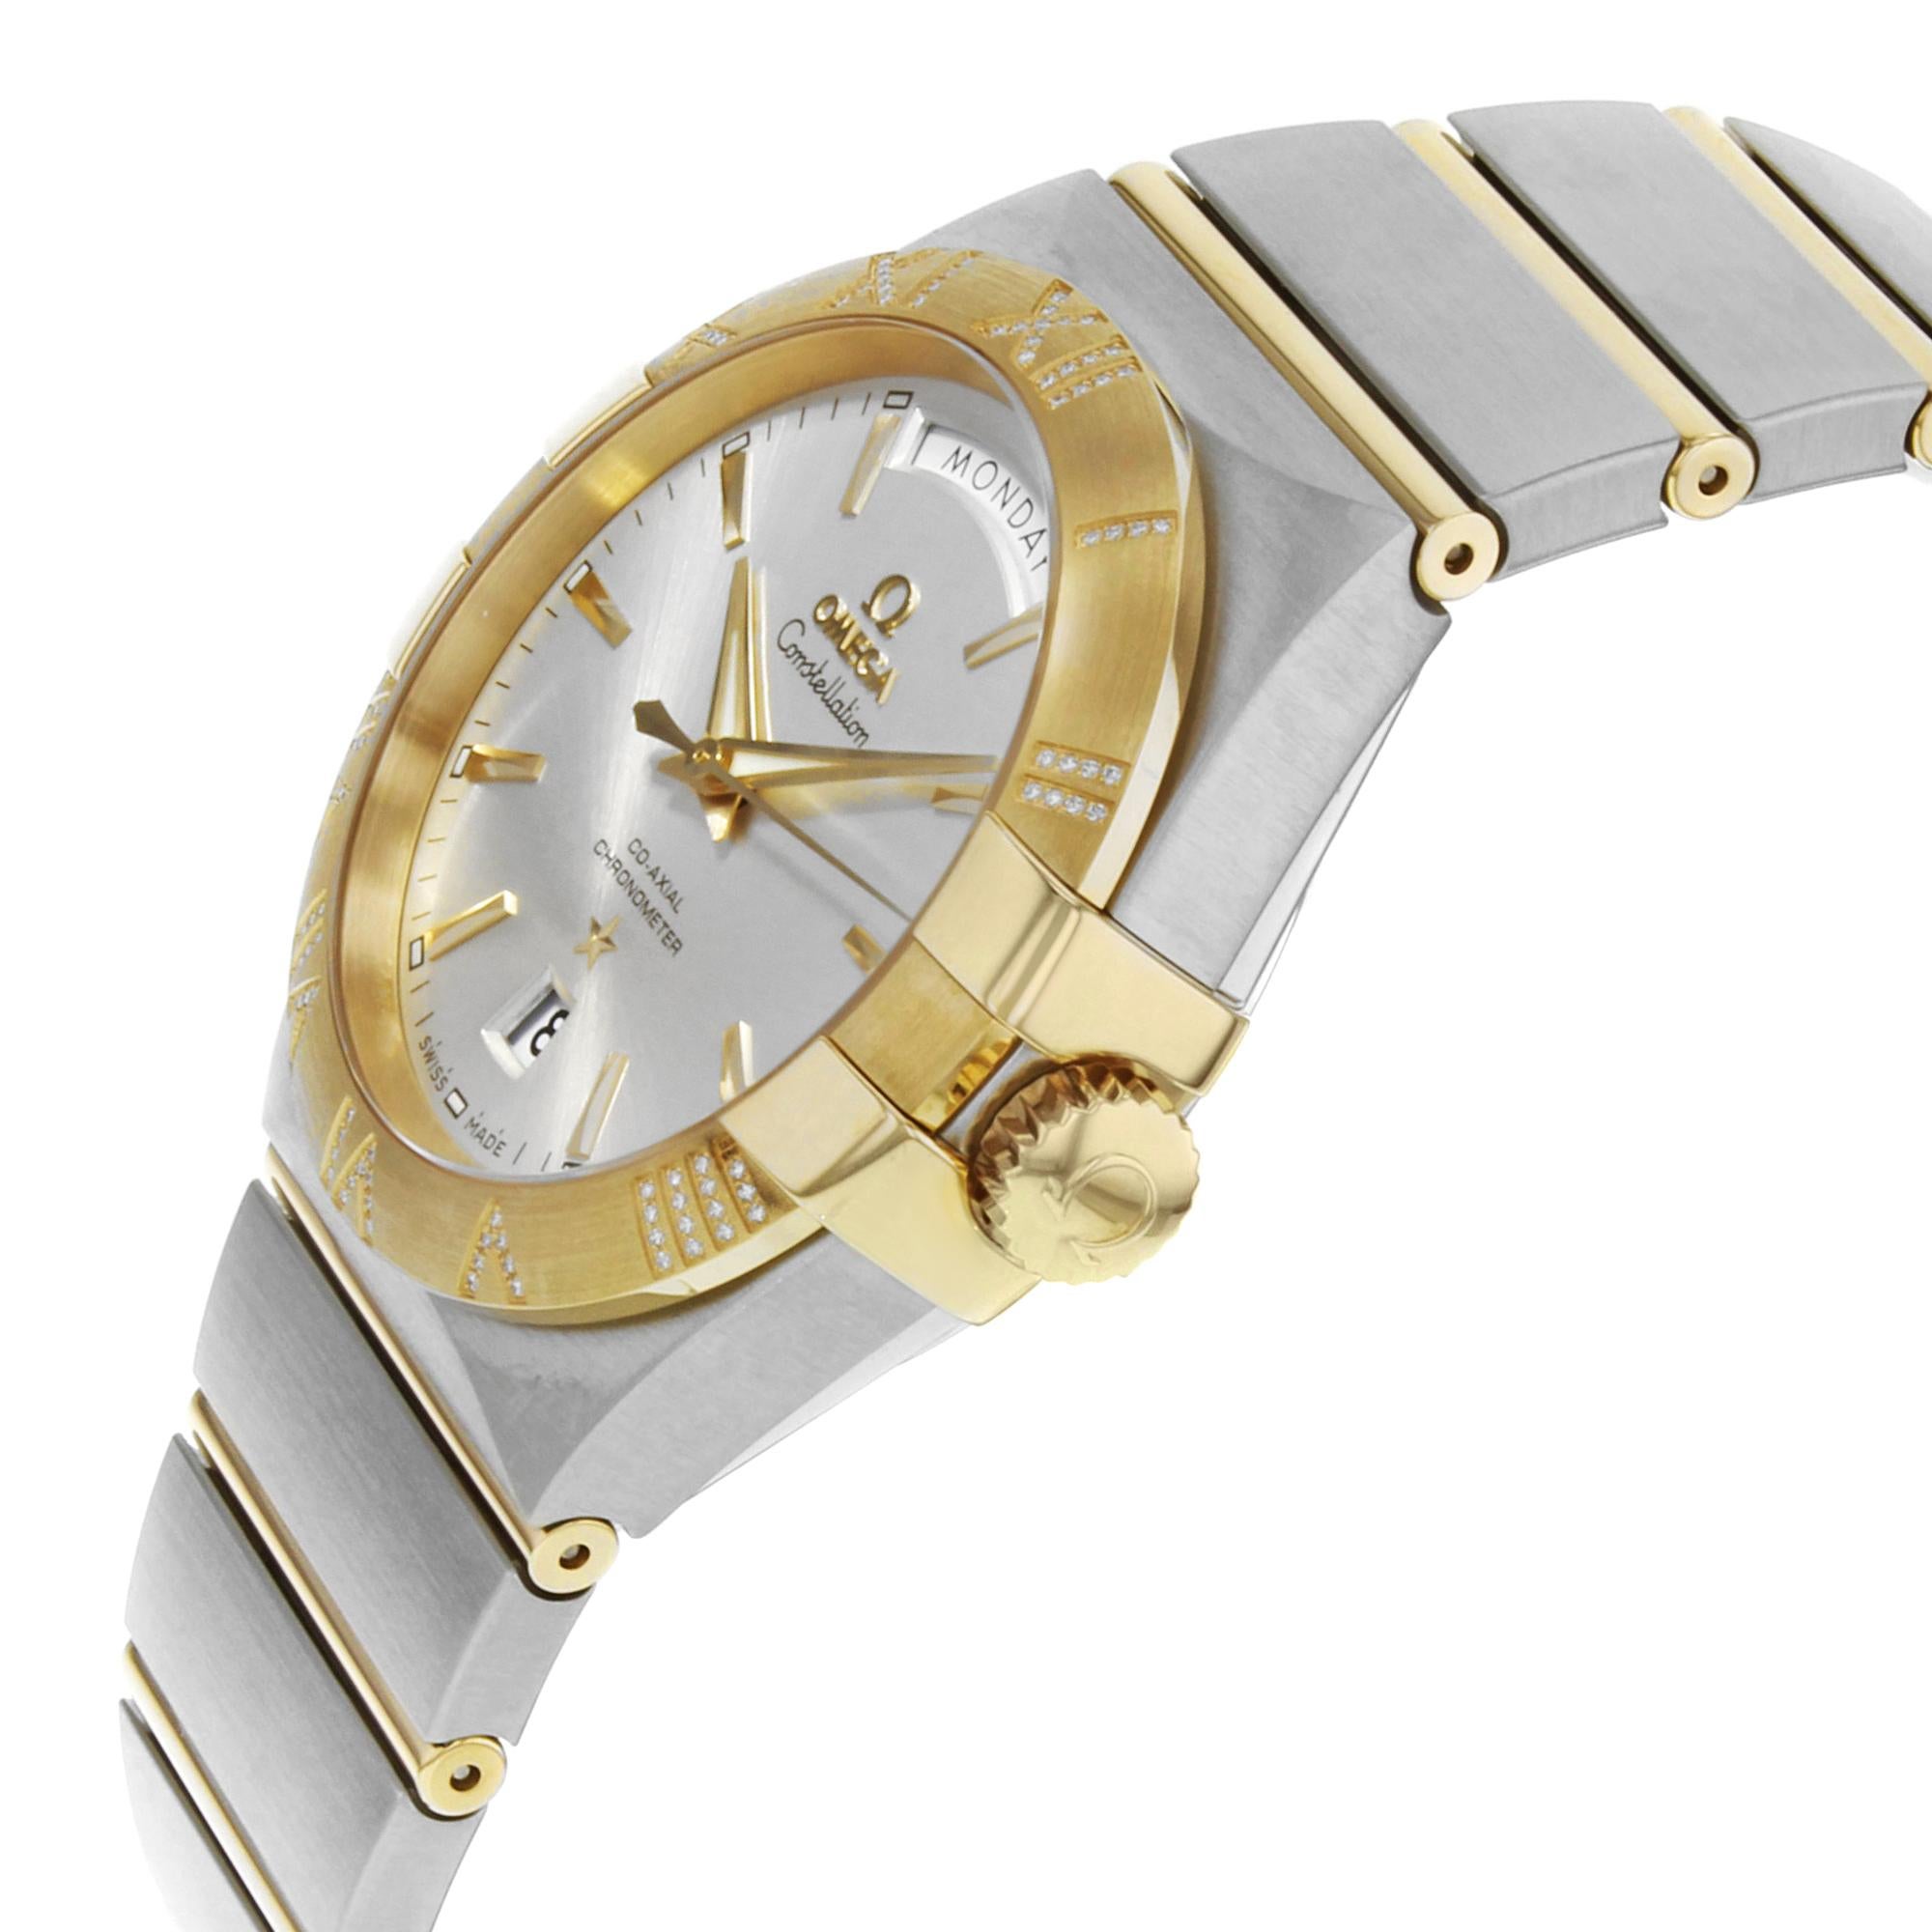 020357 This display model Omega Constellation 123.25.38.22.02.002 is a beautiful men's timepiece that is powered by an automatic movement which is cased in a stainless & solid gold case. It has a round shape face, day & date, diamonds dial and has